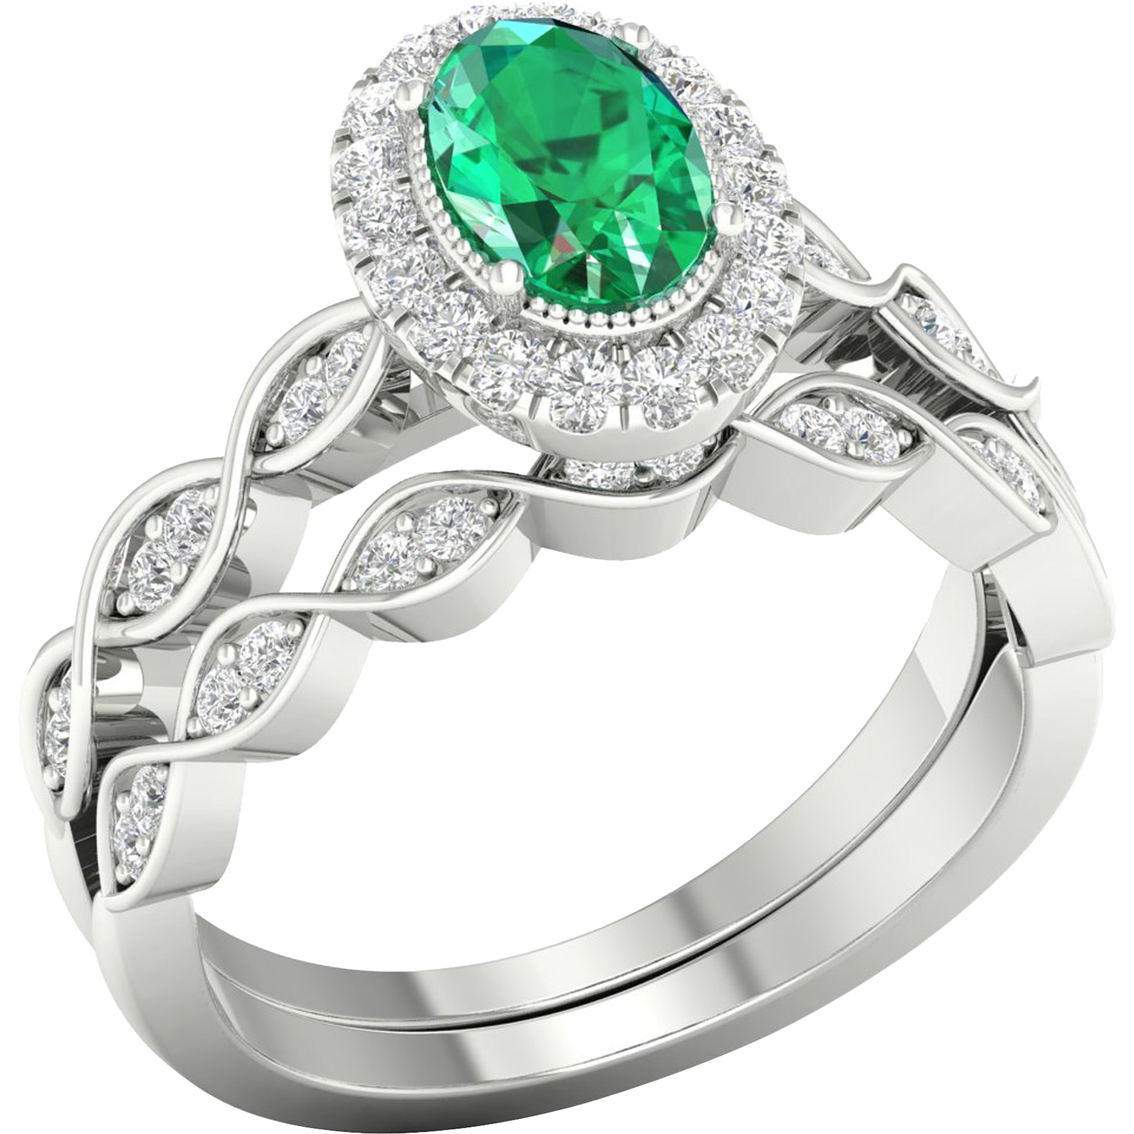 Color Bouquets by Lily 10K Gold 1/3 CTW Diamond and Genuine Emerald Bridal Set - Image 2 of 4